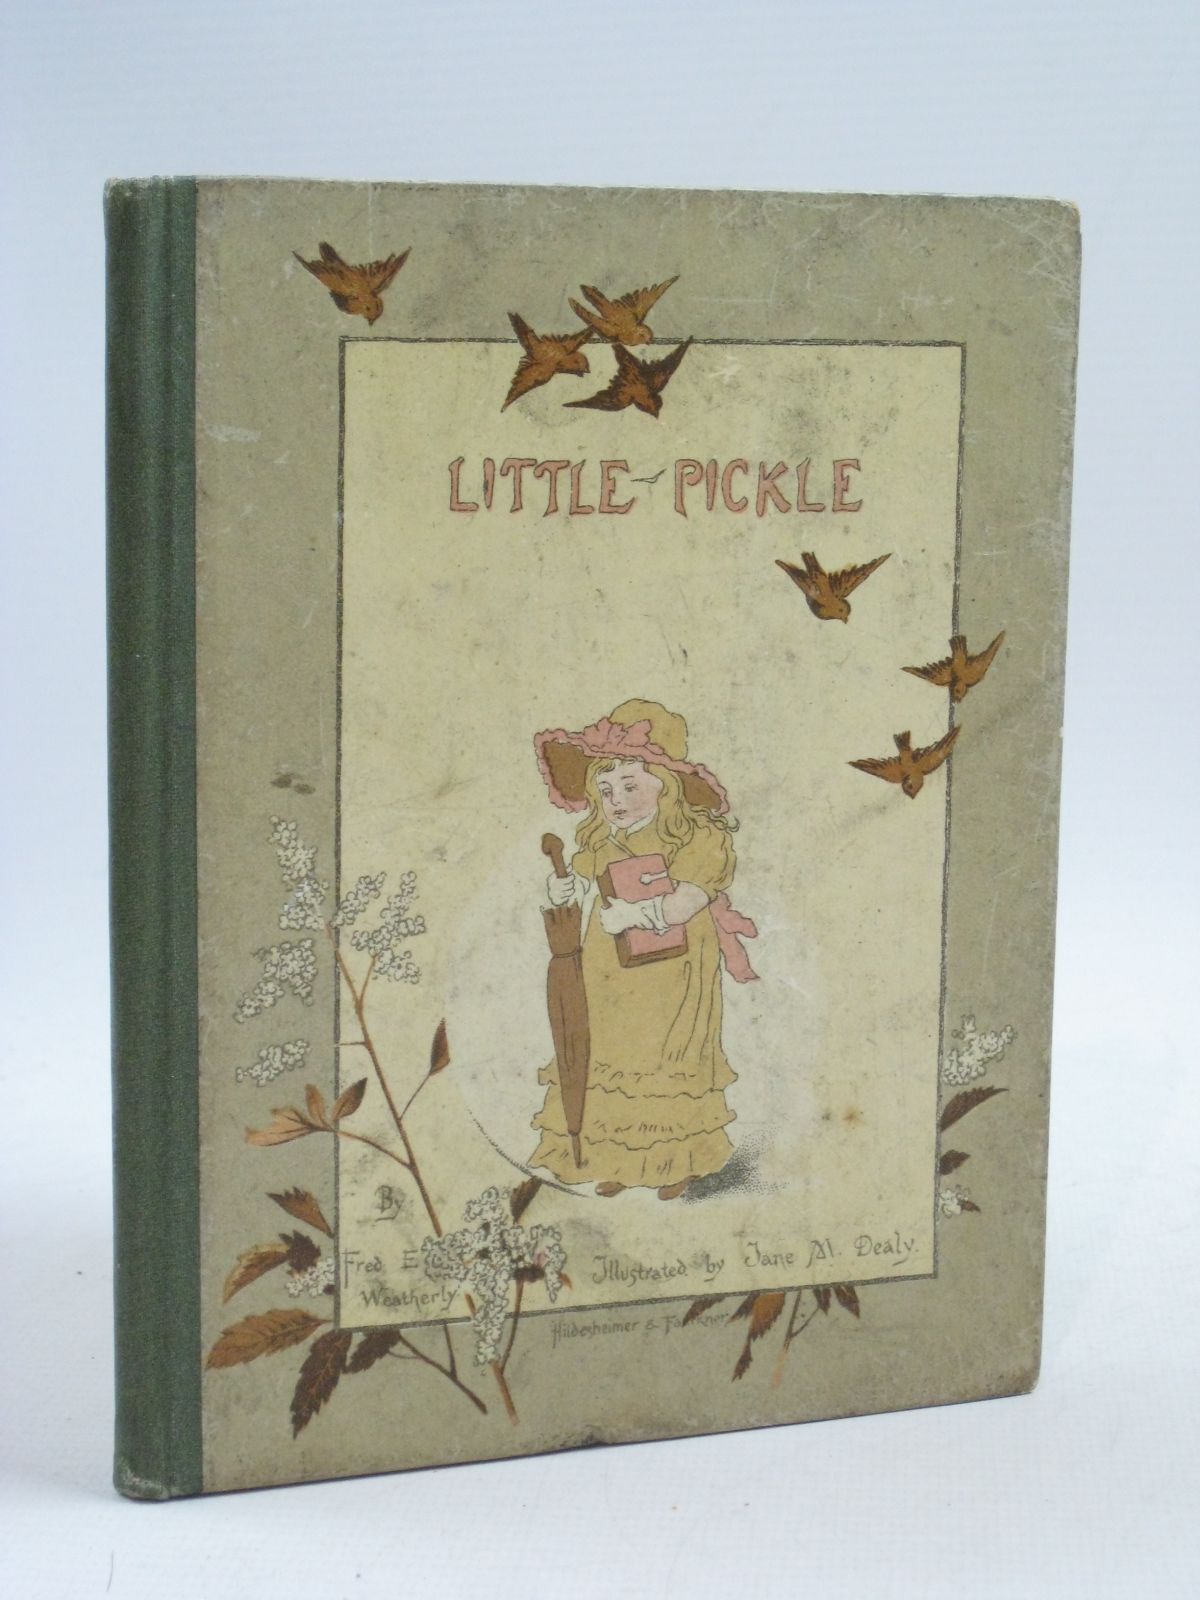 Cover of LITTLE PICKLE by F.E. Weatherly